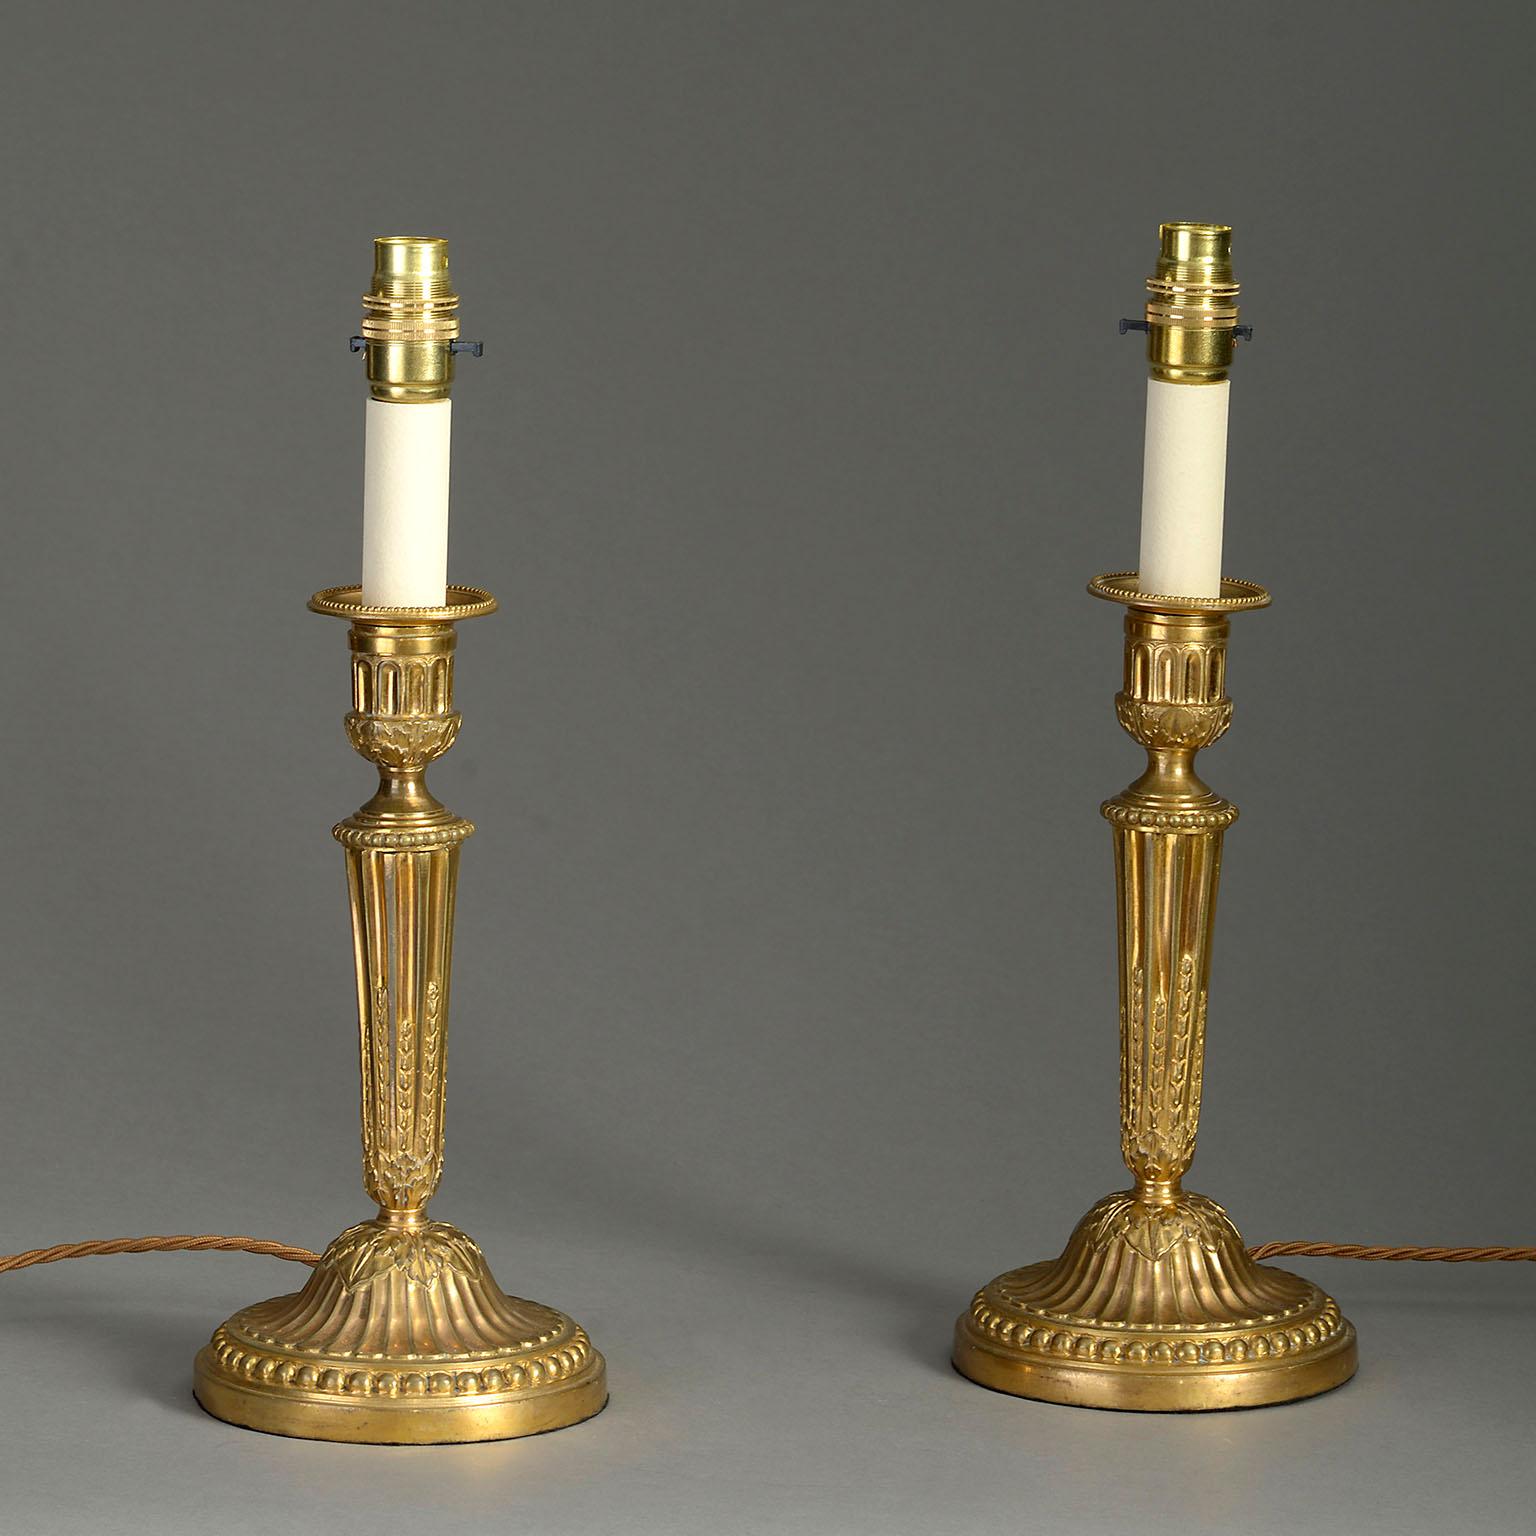 A pair of late 18th century ormolu candlesticks, the detachable socles set within urn shaped holders, raised on tapering stop-fluted stems, terminating on circular bases with beaded rims. Now mounted as lamp bases.

Dimensions refer to whole lamp